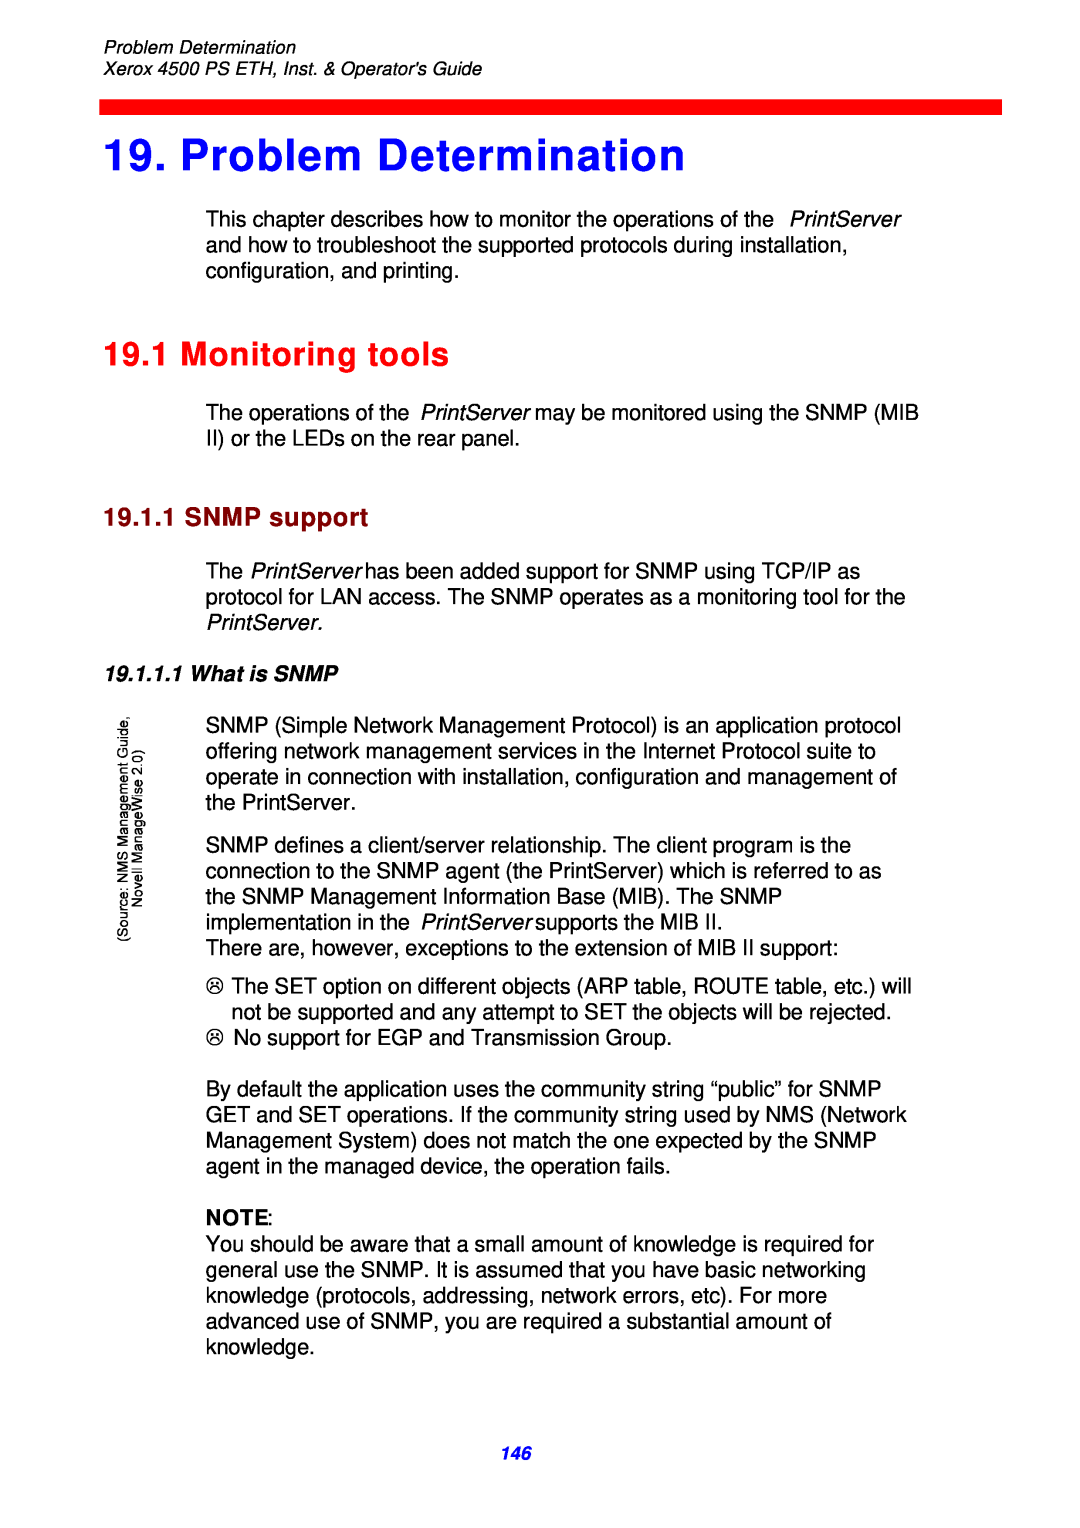 Xerox 4500 ps eth instruction manual Problem Determination, Monitoring tools, SNMP support, What is SNMP 